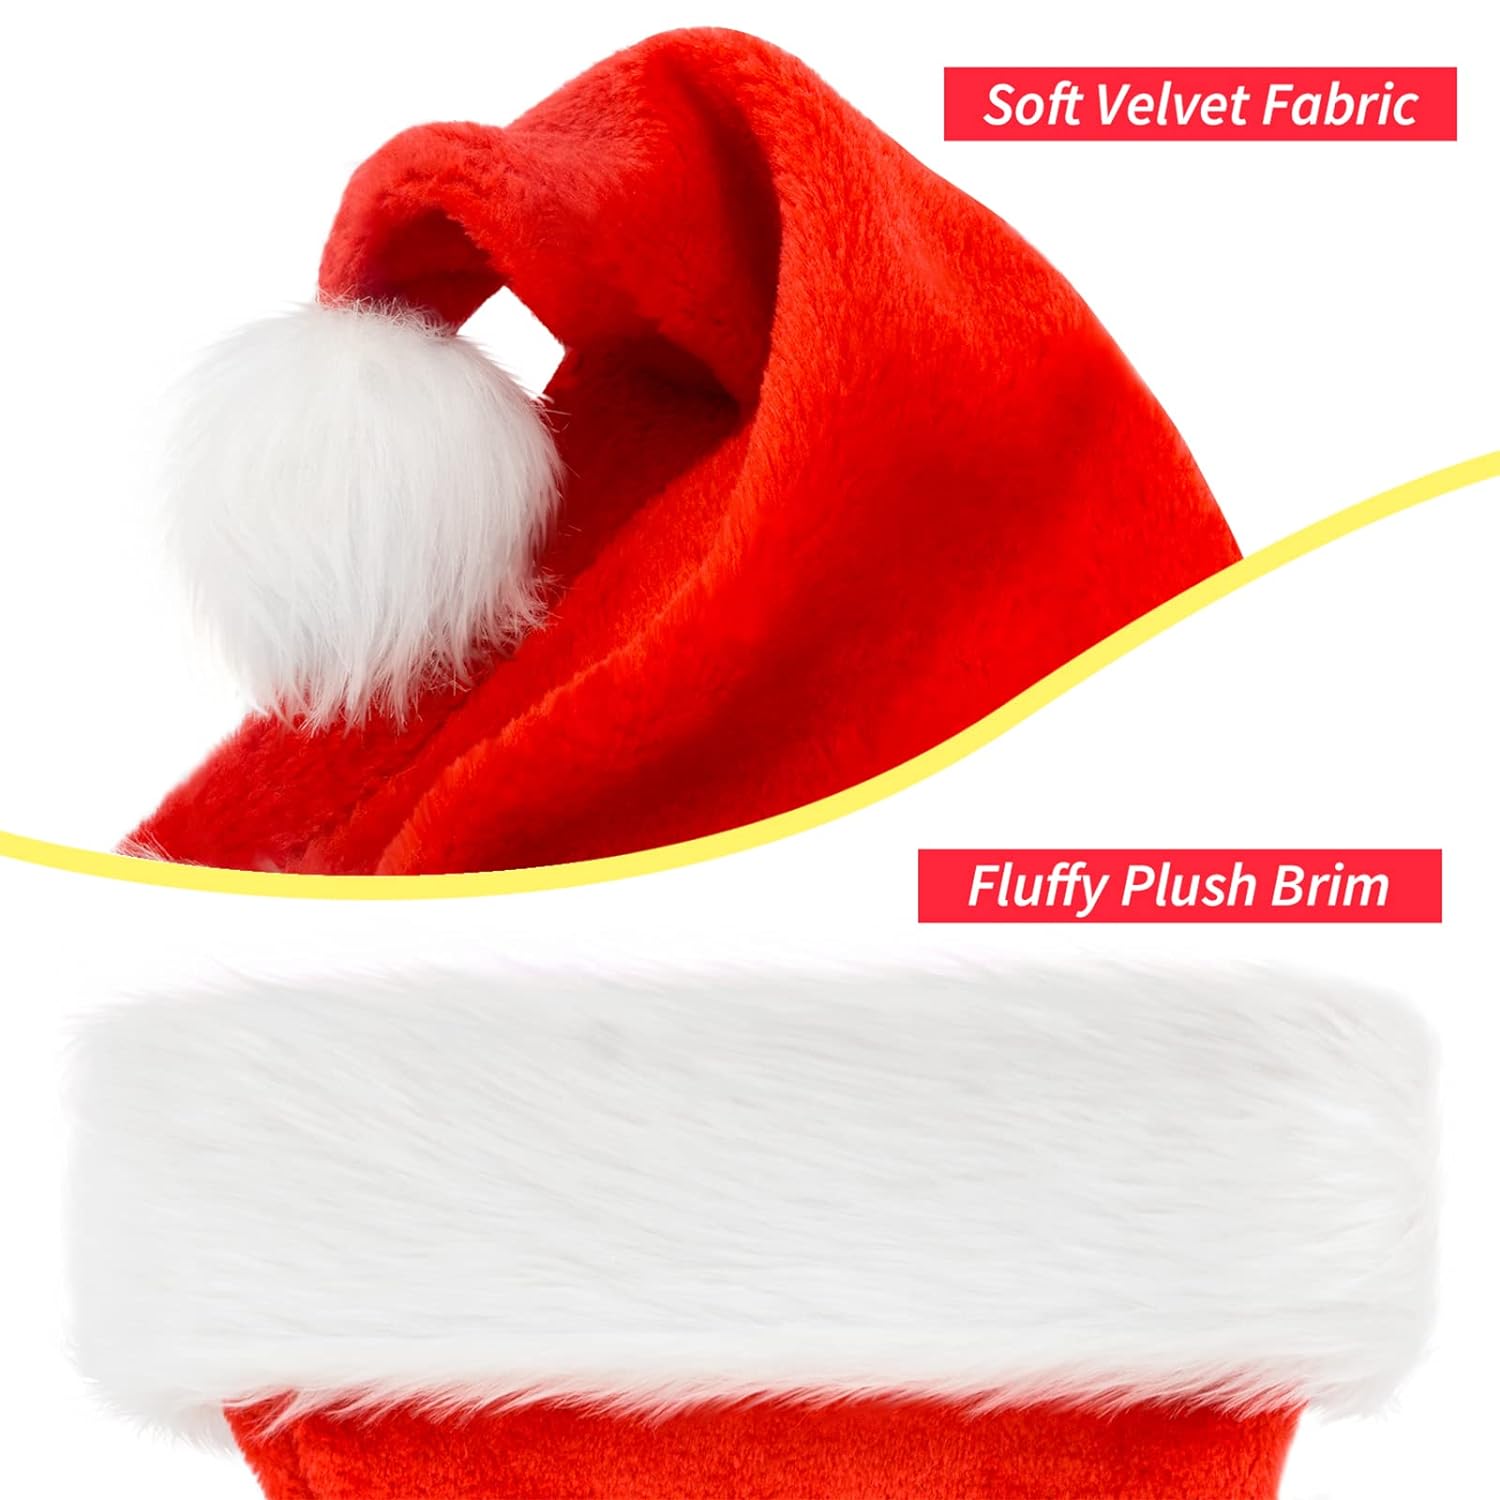 eCraftIndia Red and White Velvet Classic Fur Merry Christmas Hats, Santa Claus Caps for kids and Adults - XMAS Caps, Santa Hats for Christmas, New Year, Festive Holiday Party Celebration (Set of 12) 6